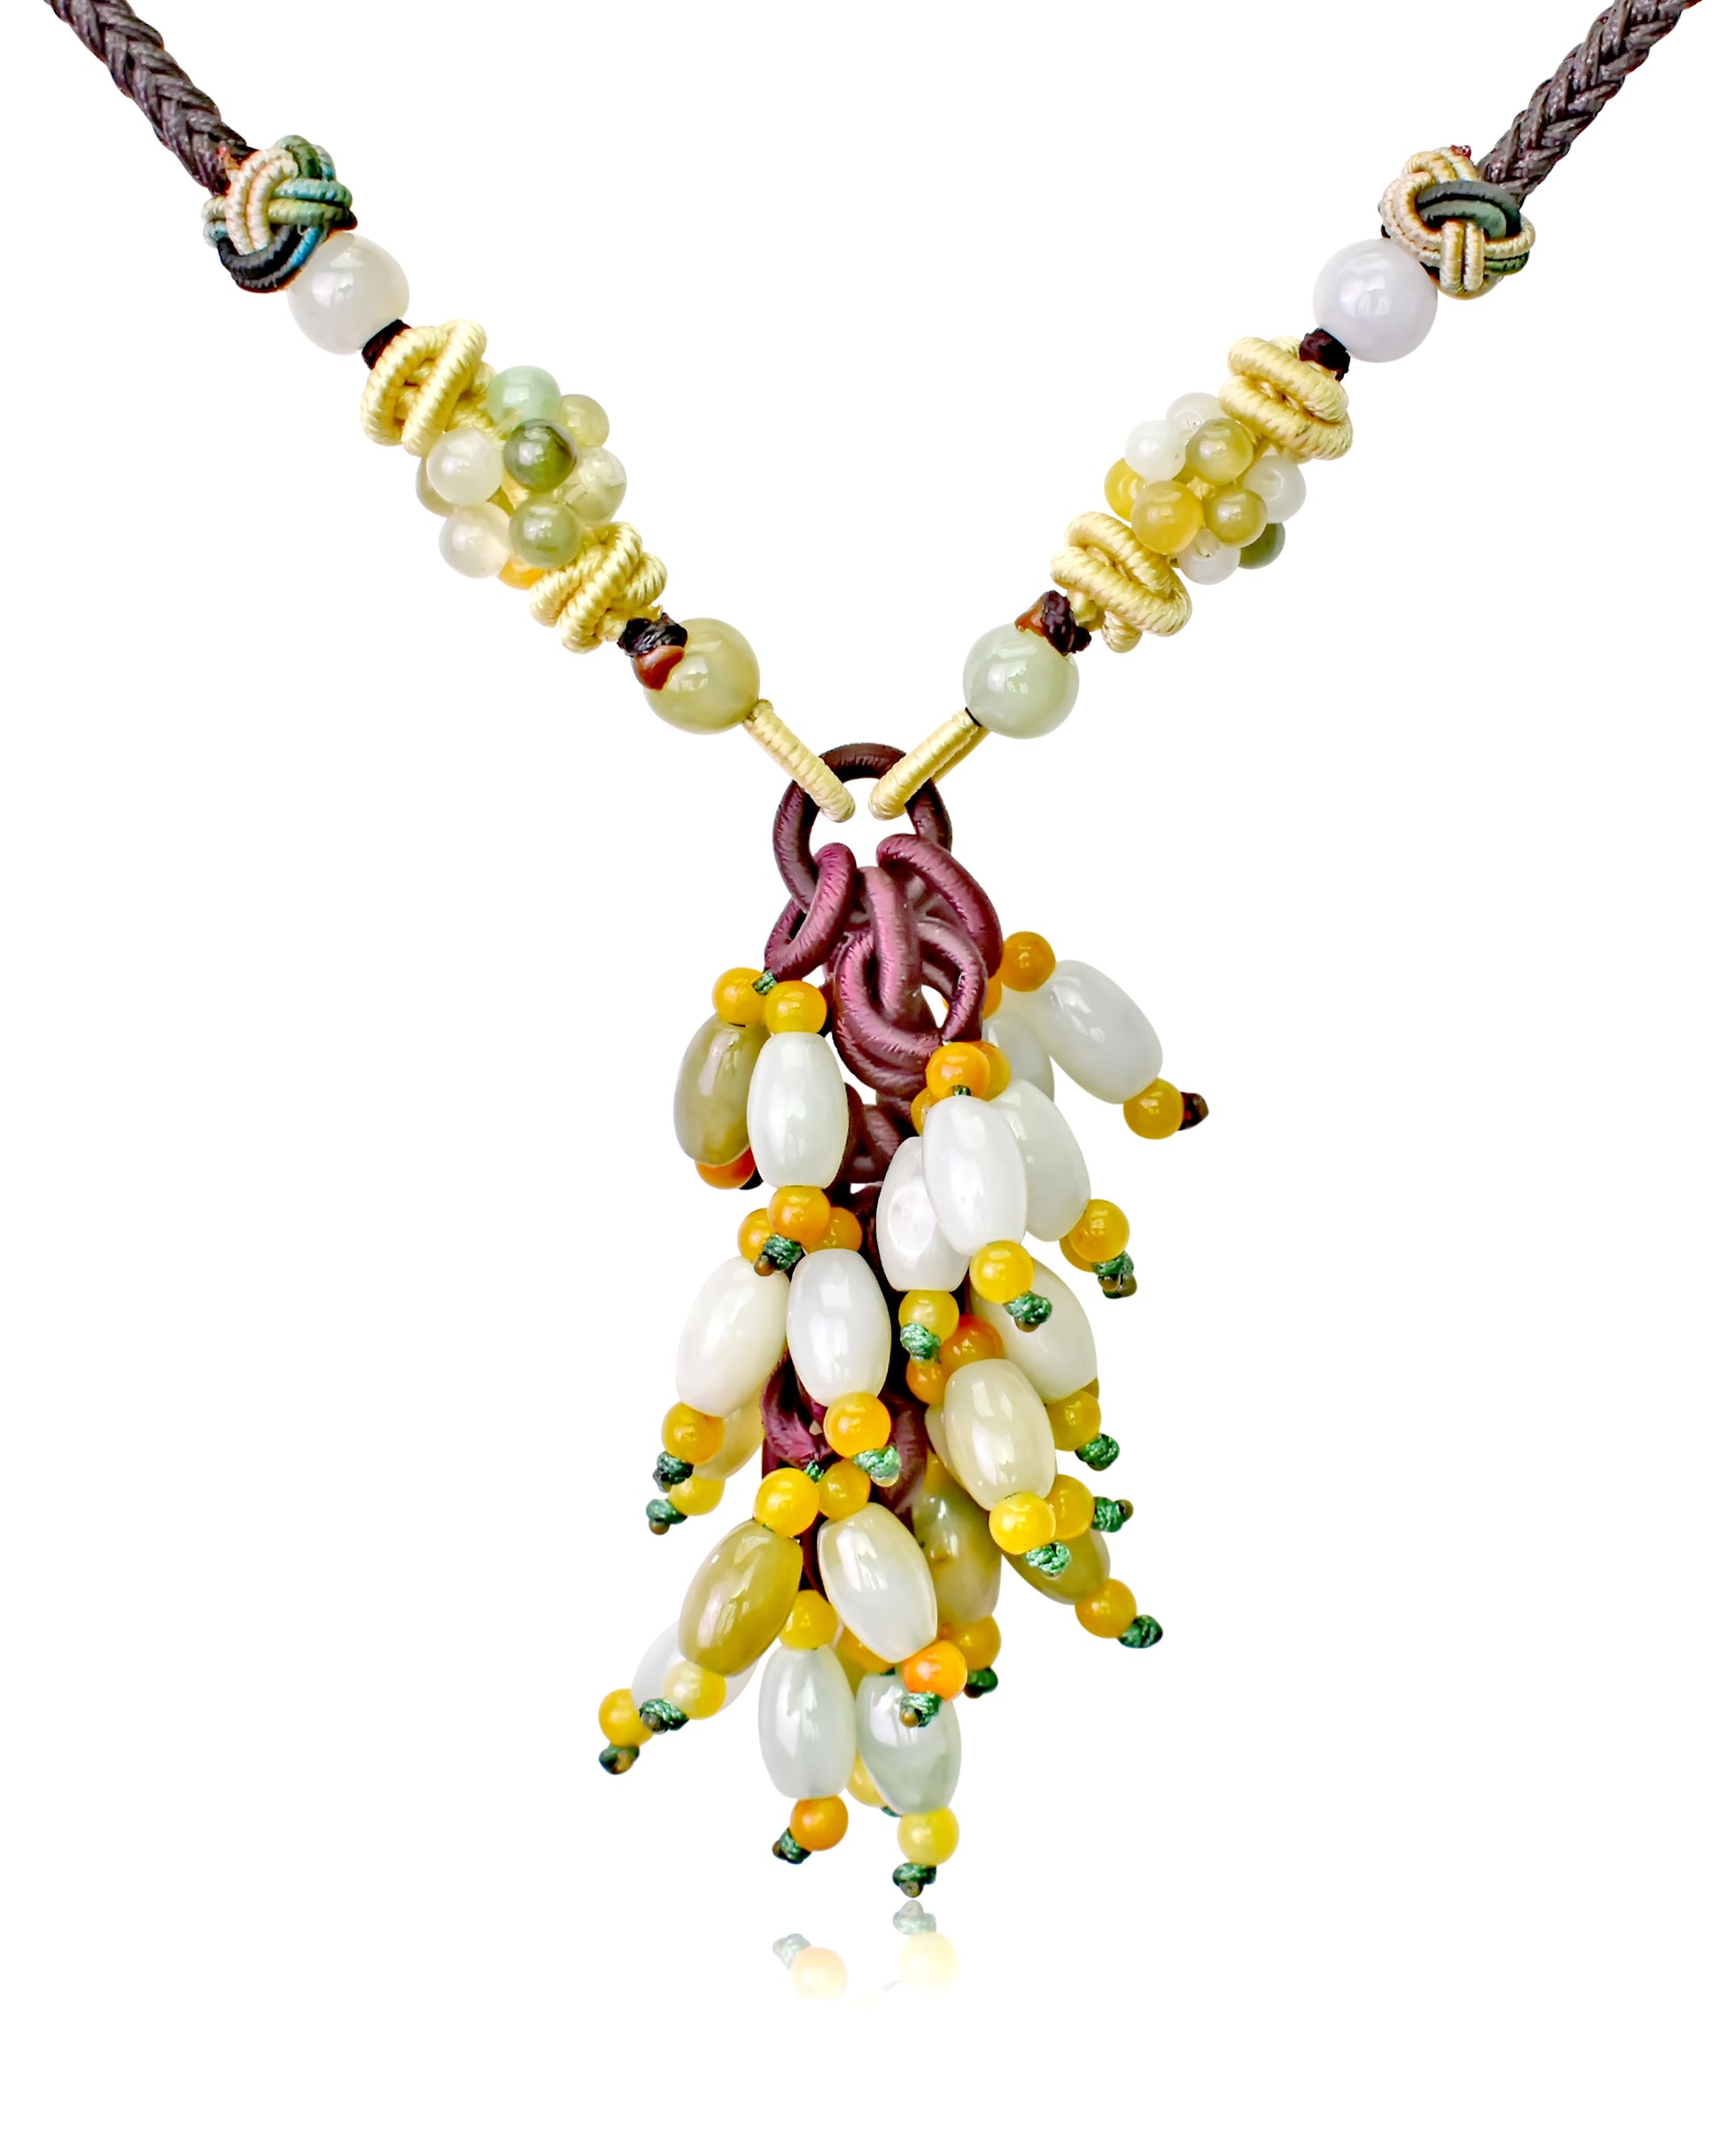 Get Timeless Beauty with this Handcrafted Chunk of Jade Beads Necklace